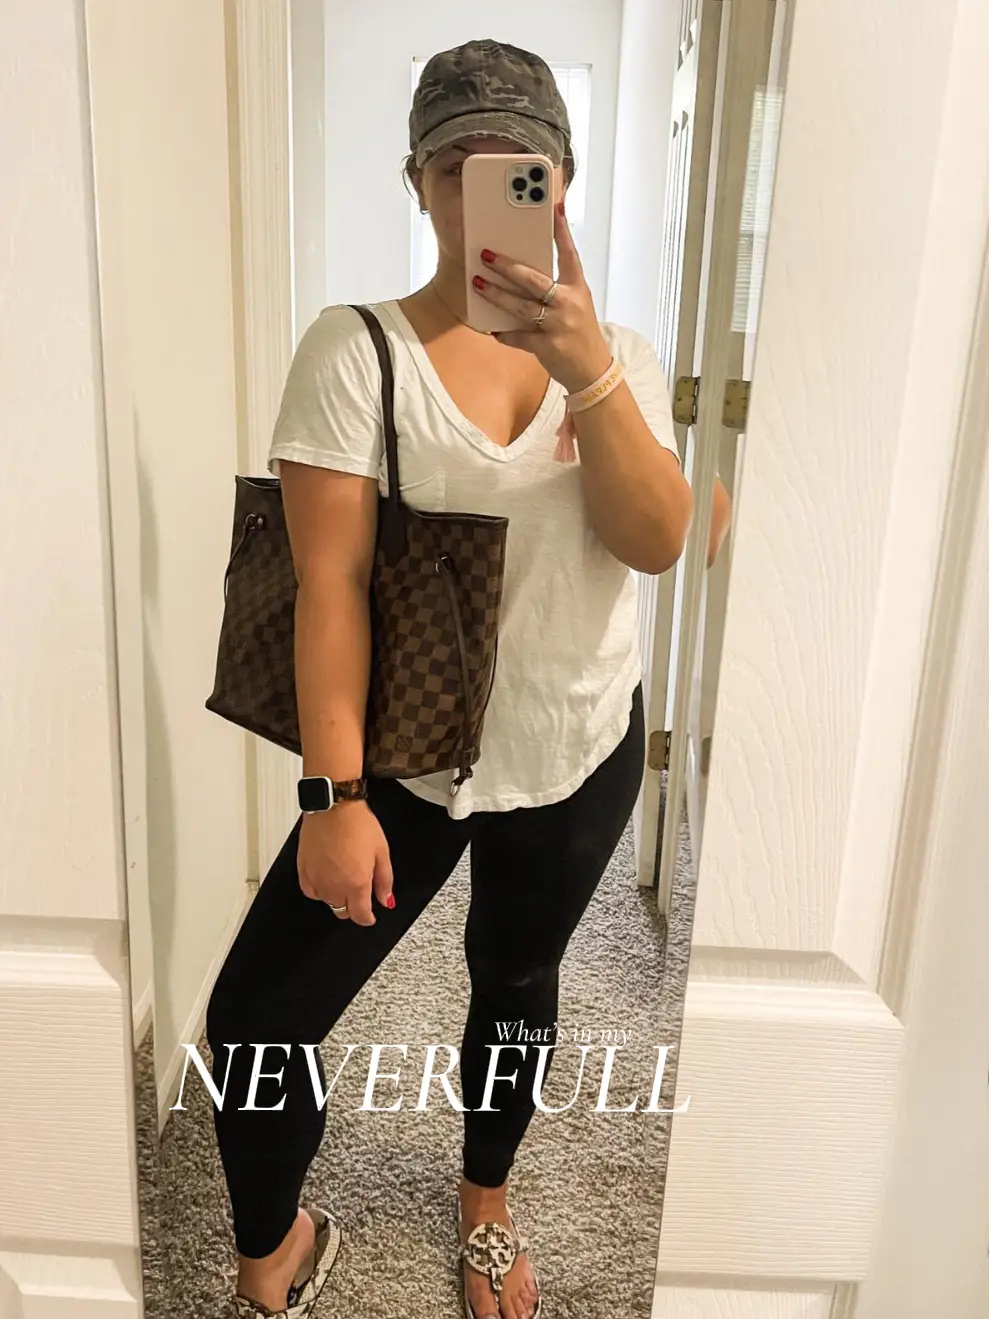 Louis Vuitton My World Tour Neverfull Unboxing and Reveal! 